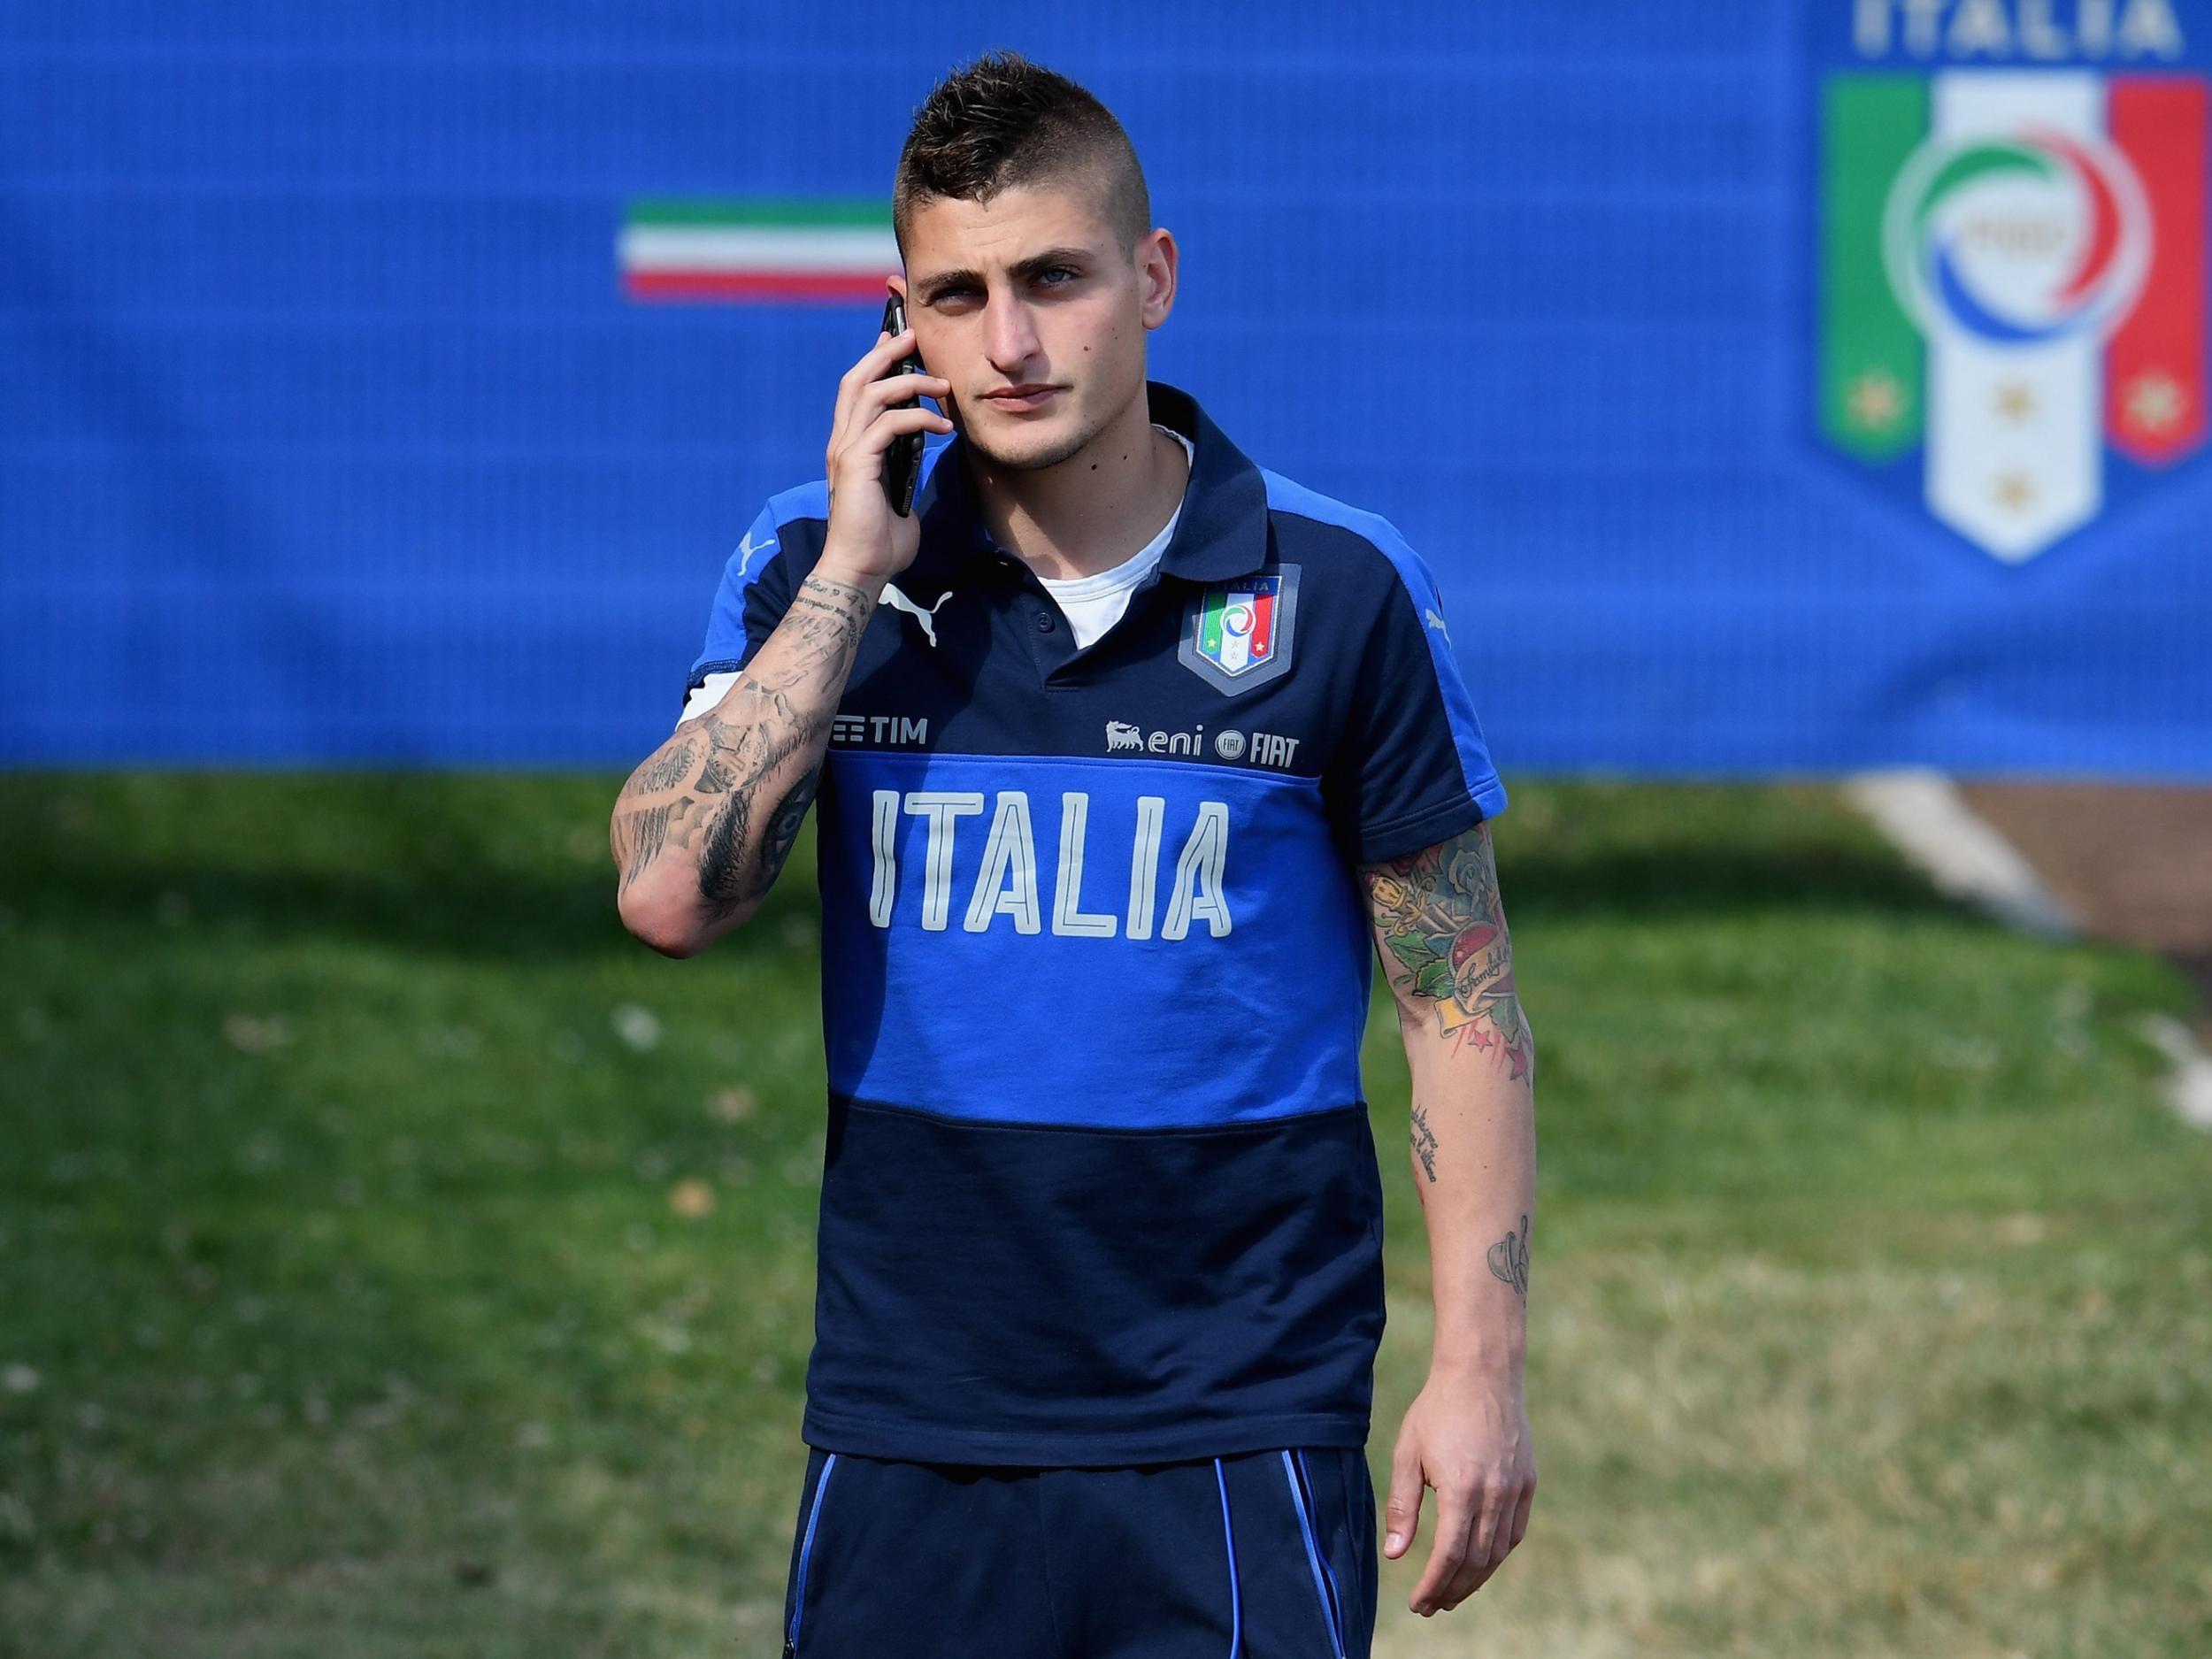 Barcelona should pay whatever price to seal Marco Verratti's